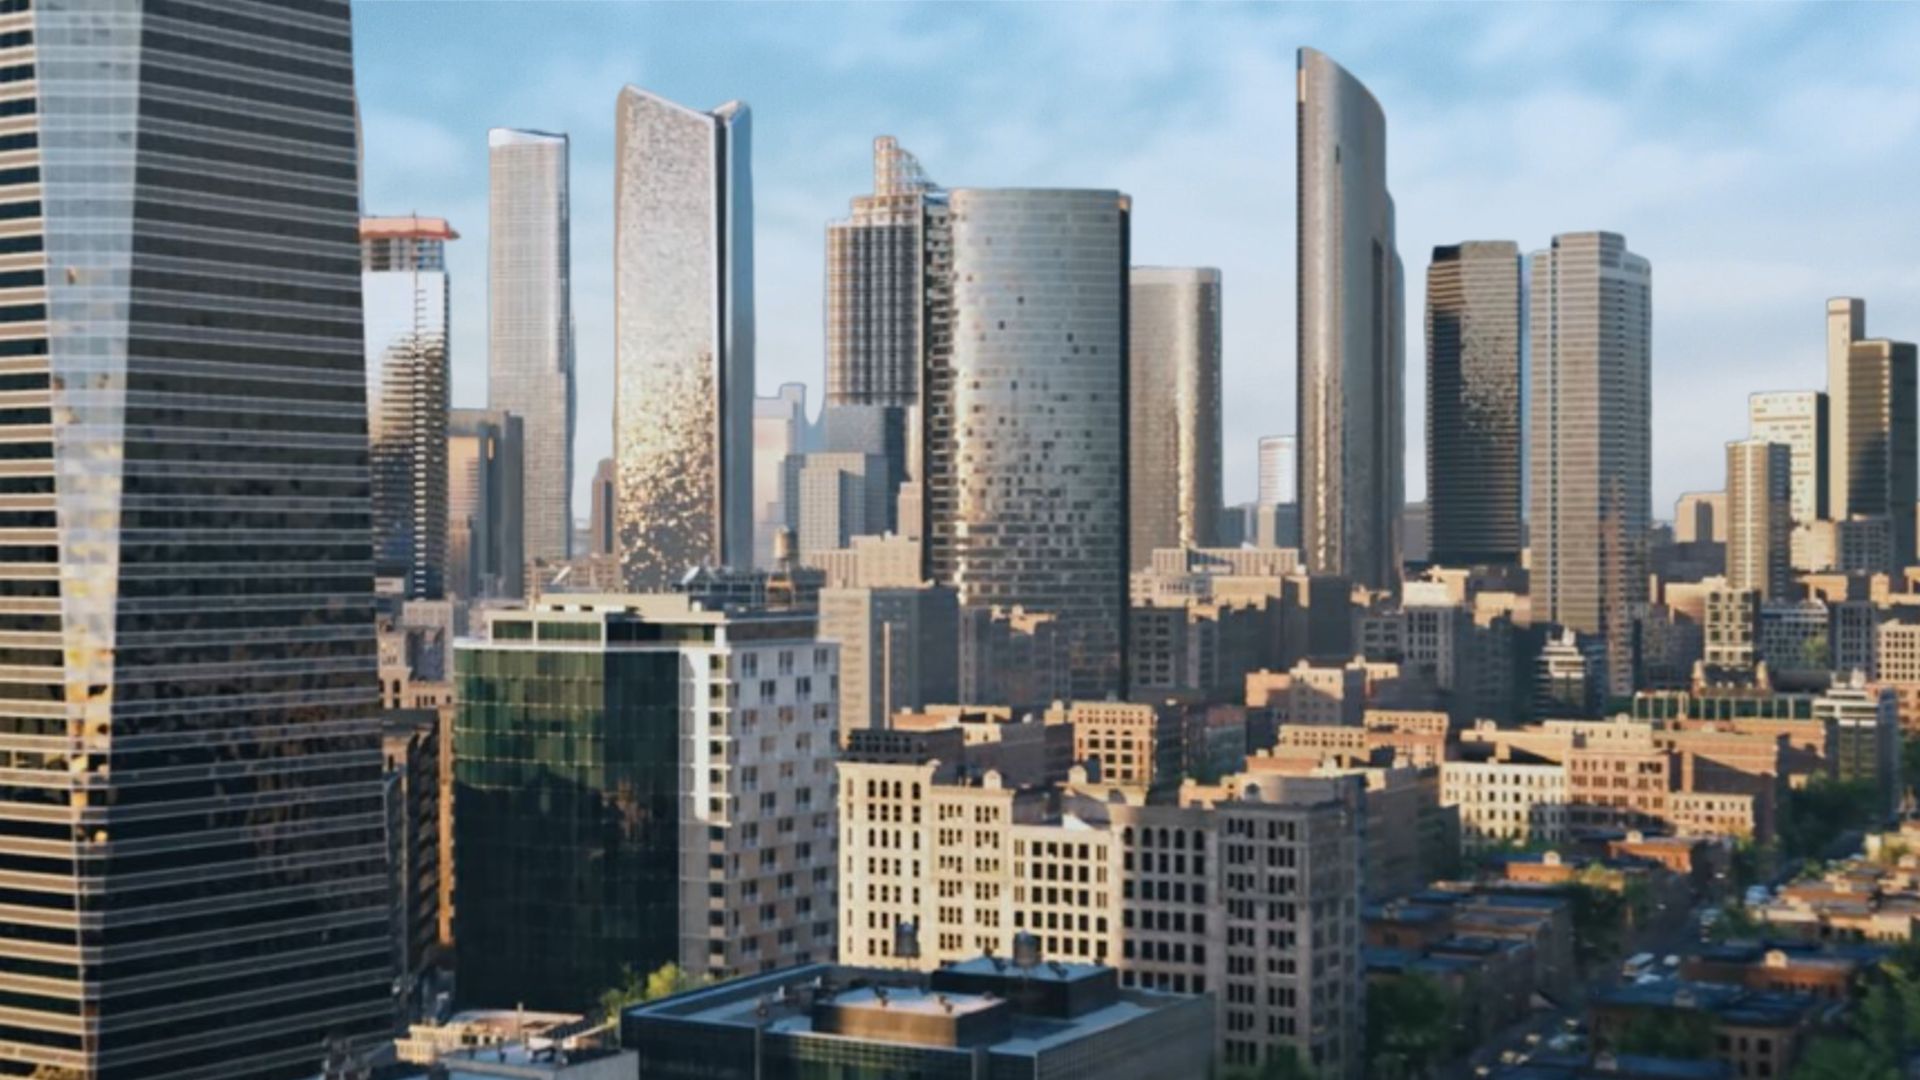 Why Are We so Excited about Cities: Skylines 2?